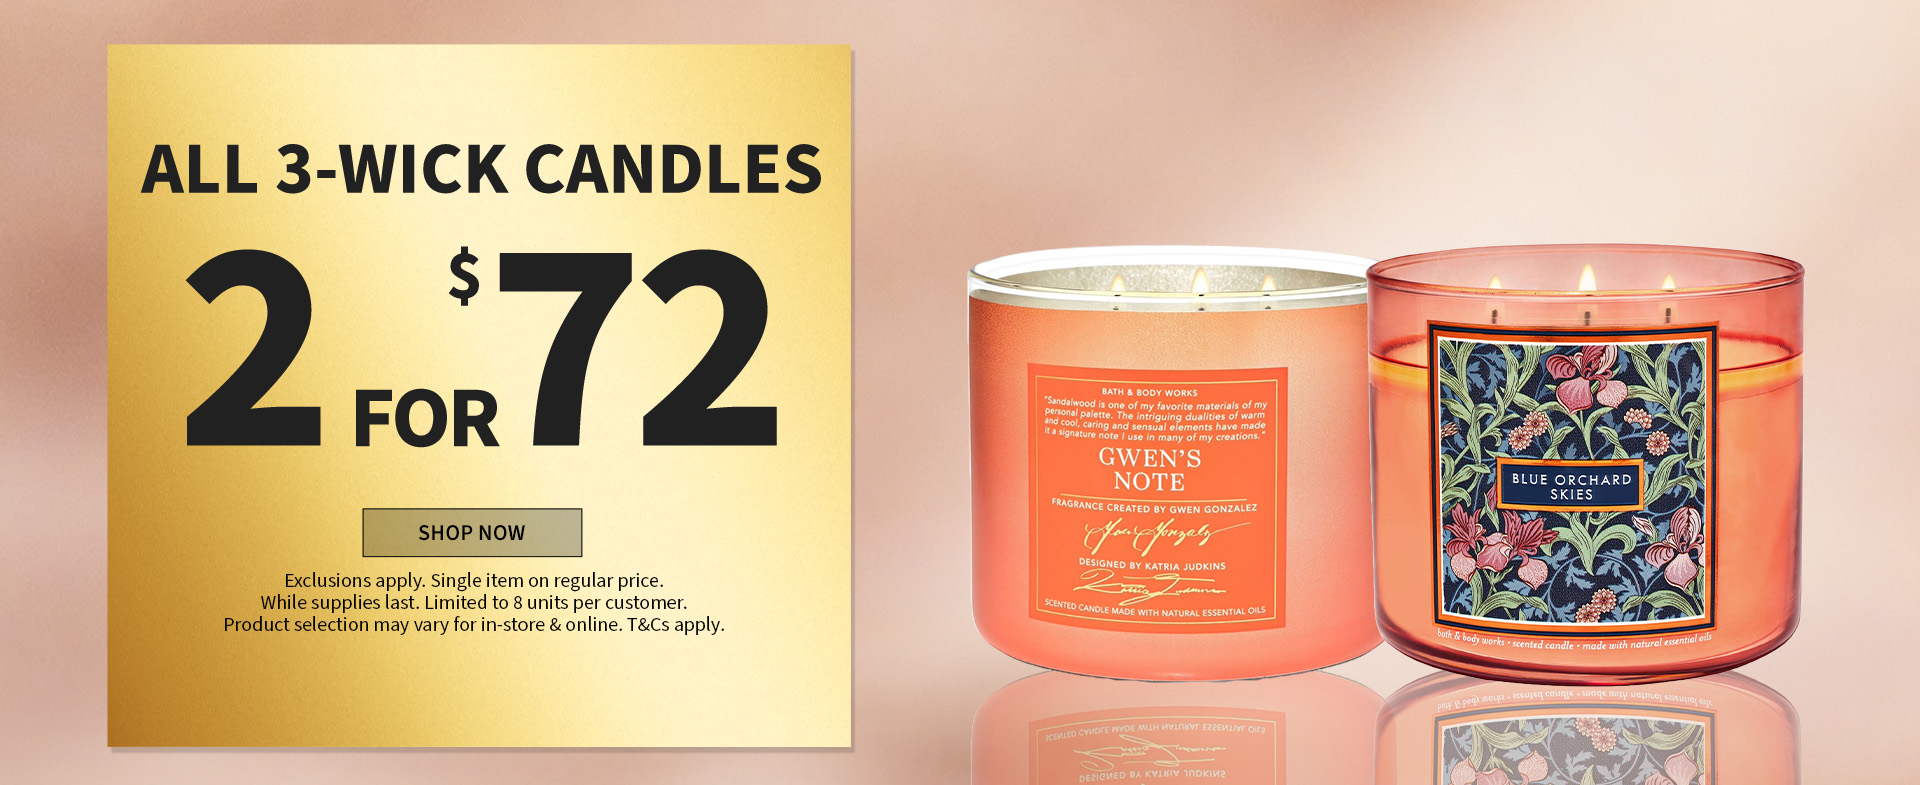 ALL 3-WICK CANDLES 2 FOR $$